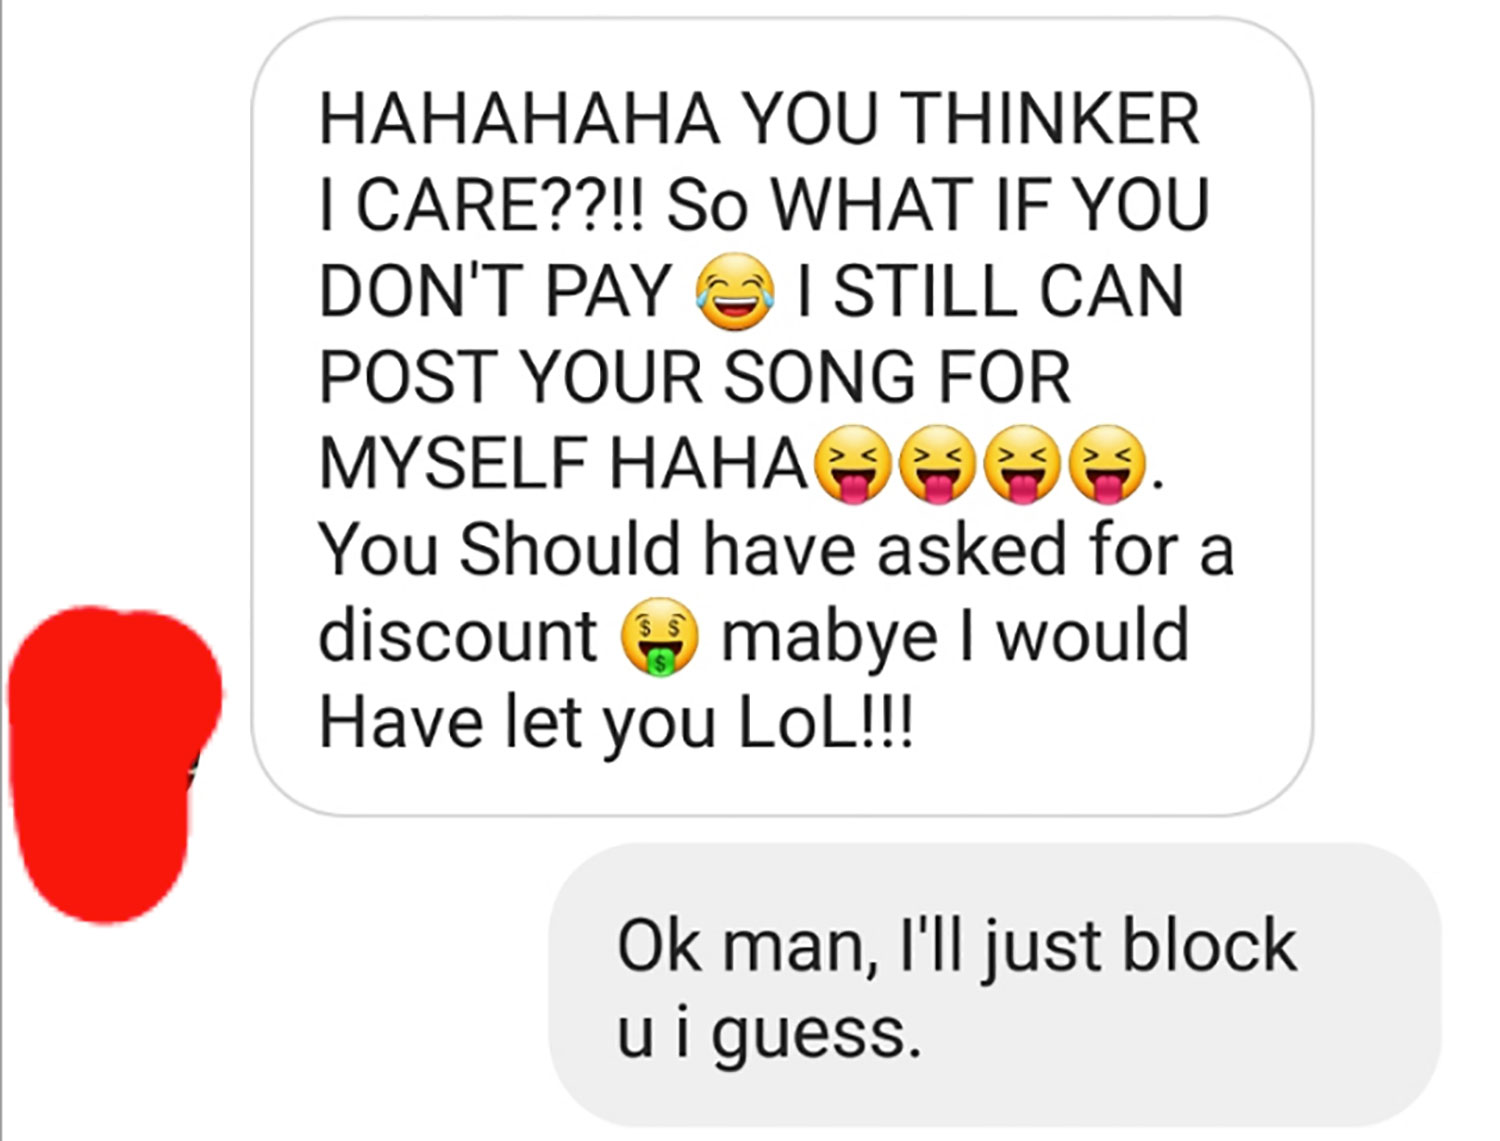 icon - Hahahaha You Thinker I Care??!! So What If You Don'T Pay I Still Can Post Your Song For Myself Haha . You Should have asked for a discount mabye I would Have let you Lol!!! Ok man, I'll just block u i guess.